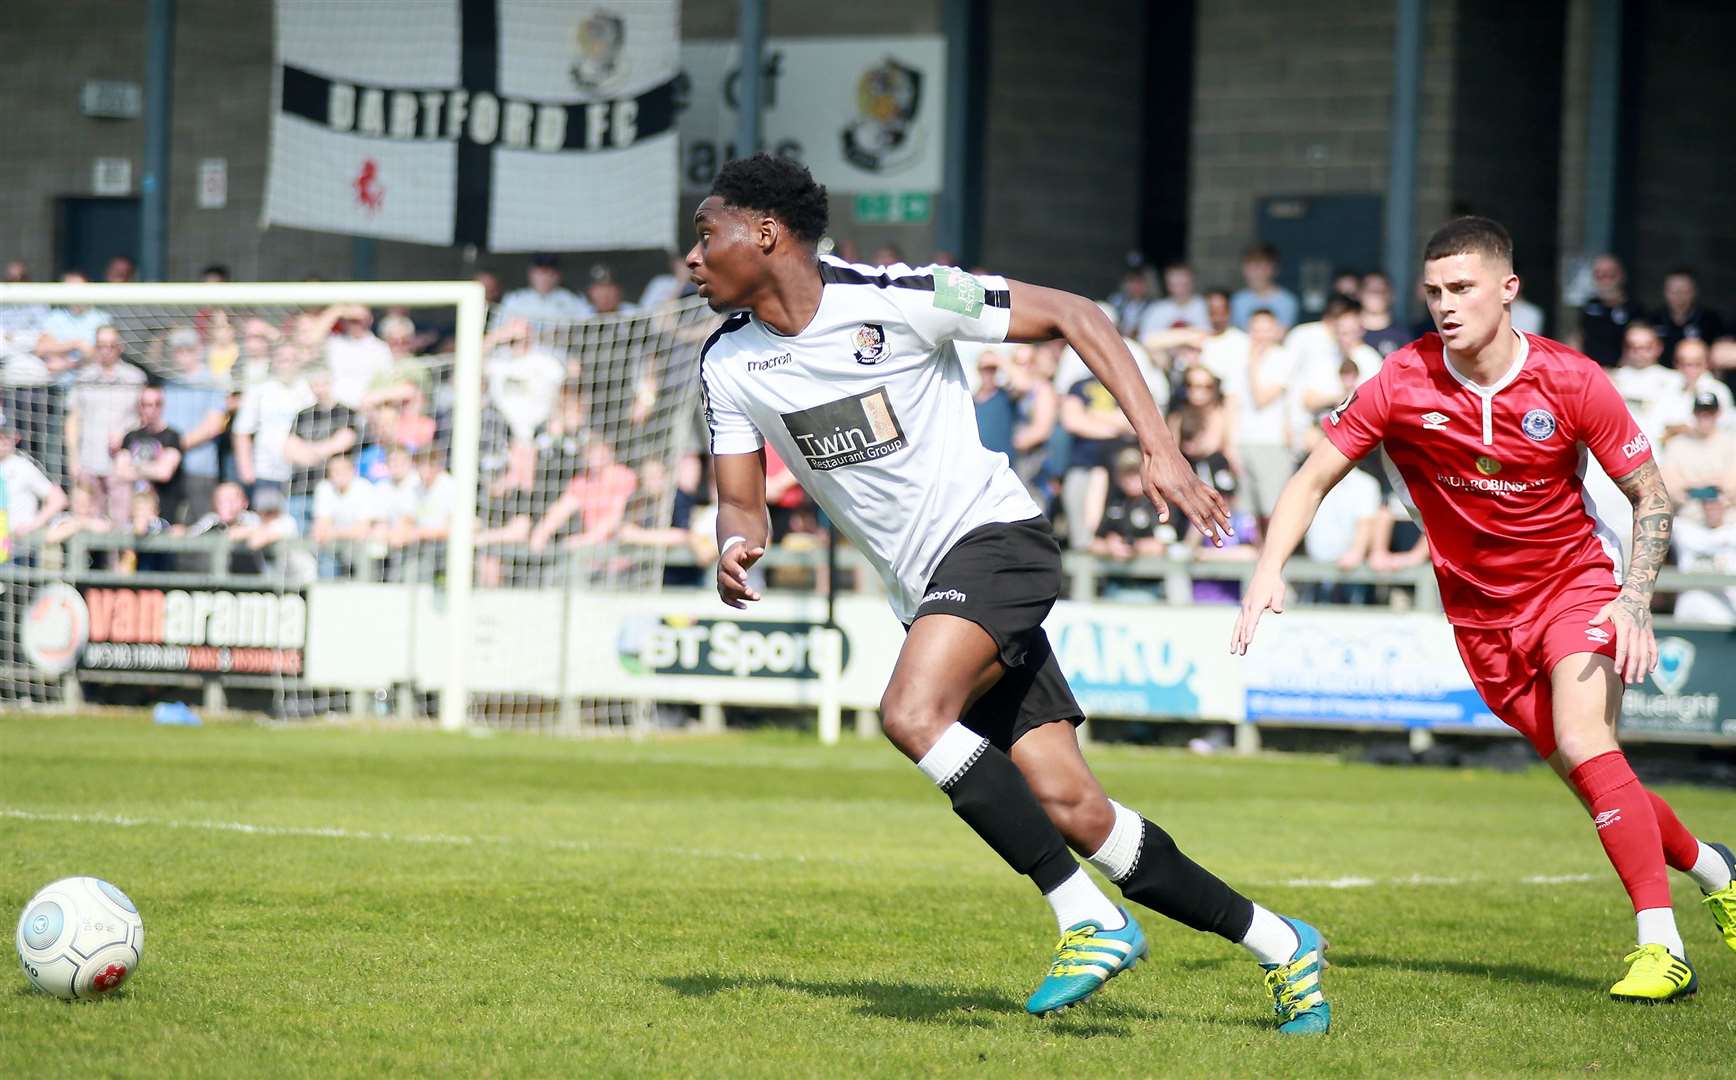 .Caption:.National League South.Dartford (White/Black). vs.Billericay Town (Red).At Princes Park Dartford .No.4 Jordan Wynter shows great ball control..Picture: Phil Lee .... (8985661)